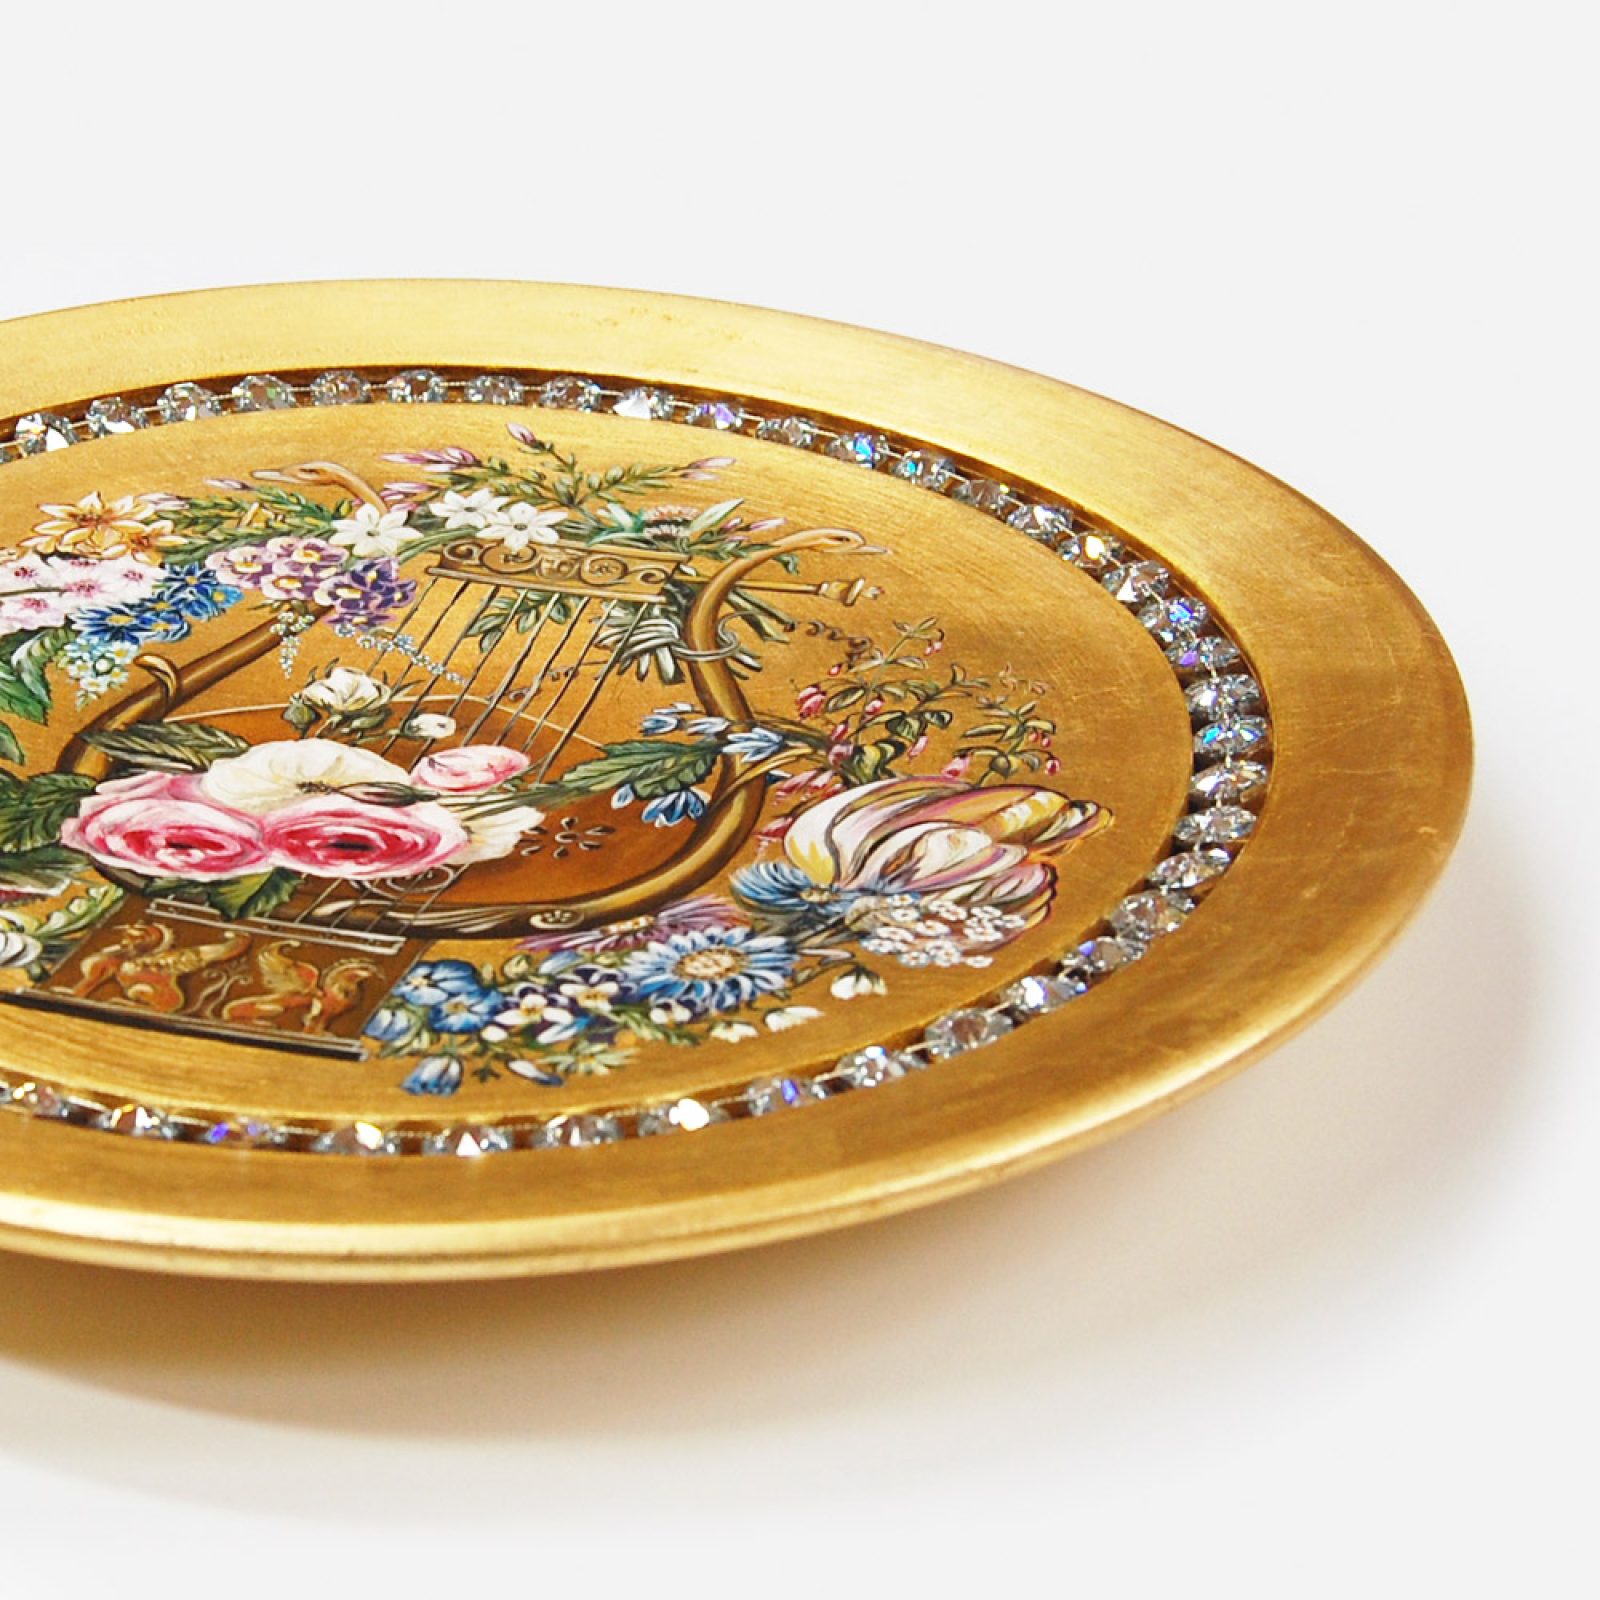 Kalomira - Hand painted and gilded with 24-karat gold | Natalis Luxus